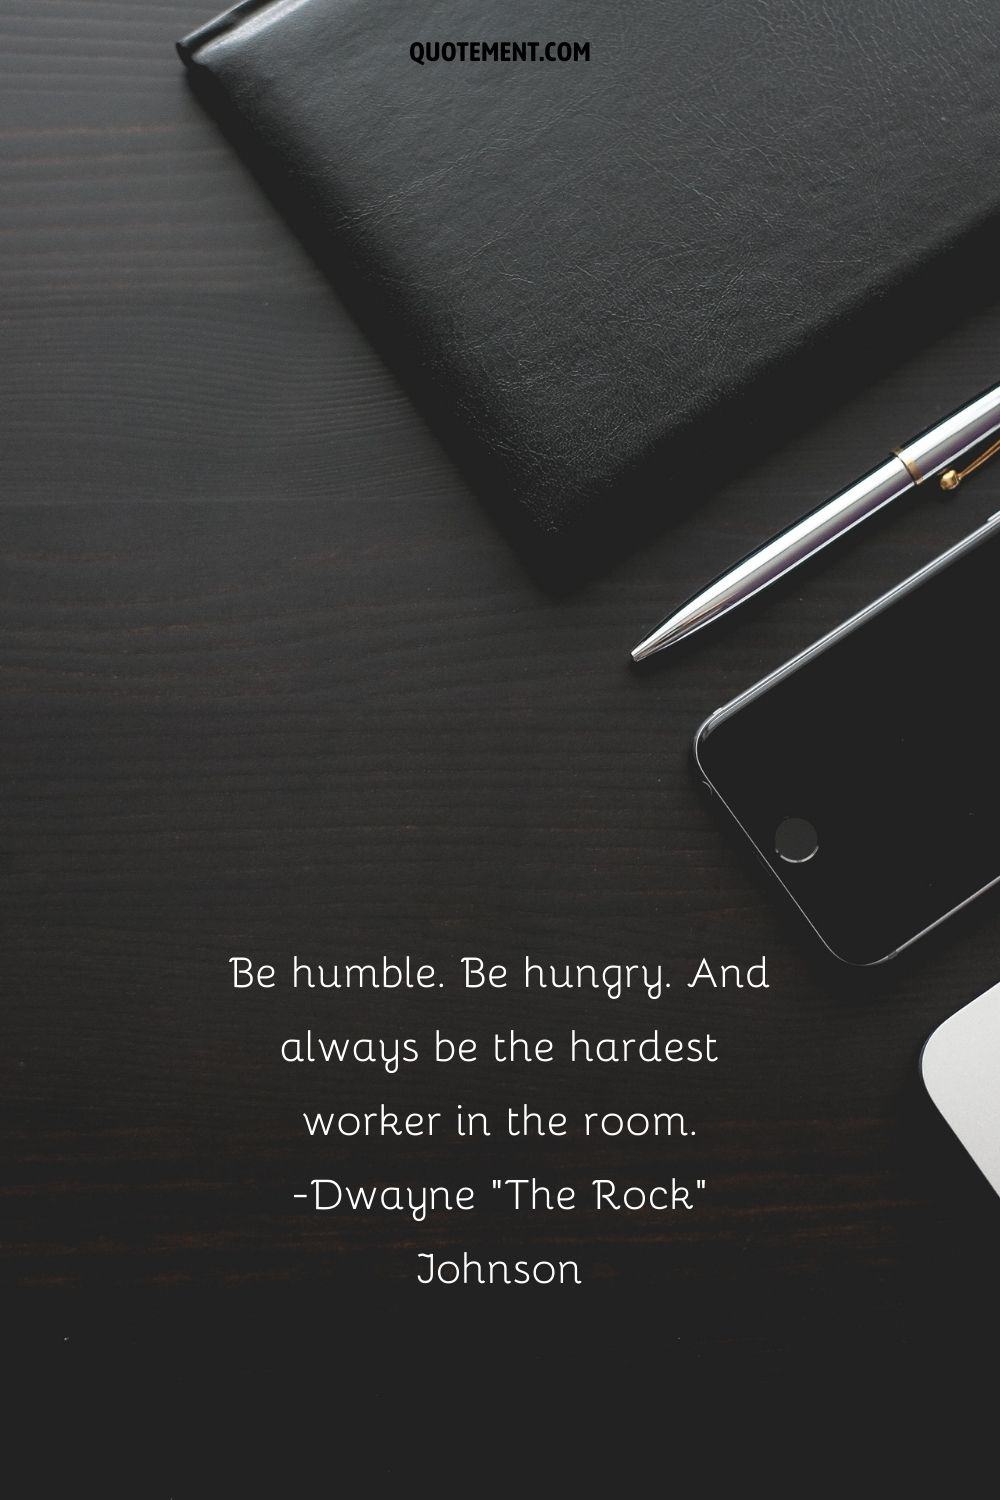 notebook, pen, and phone neatly arranged on the desk representing Wednesday work quote